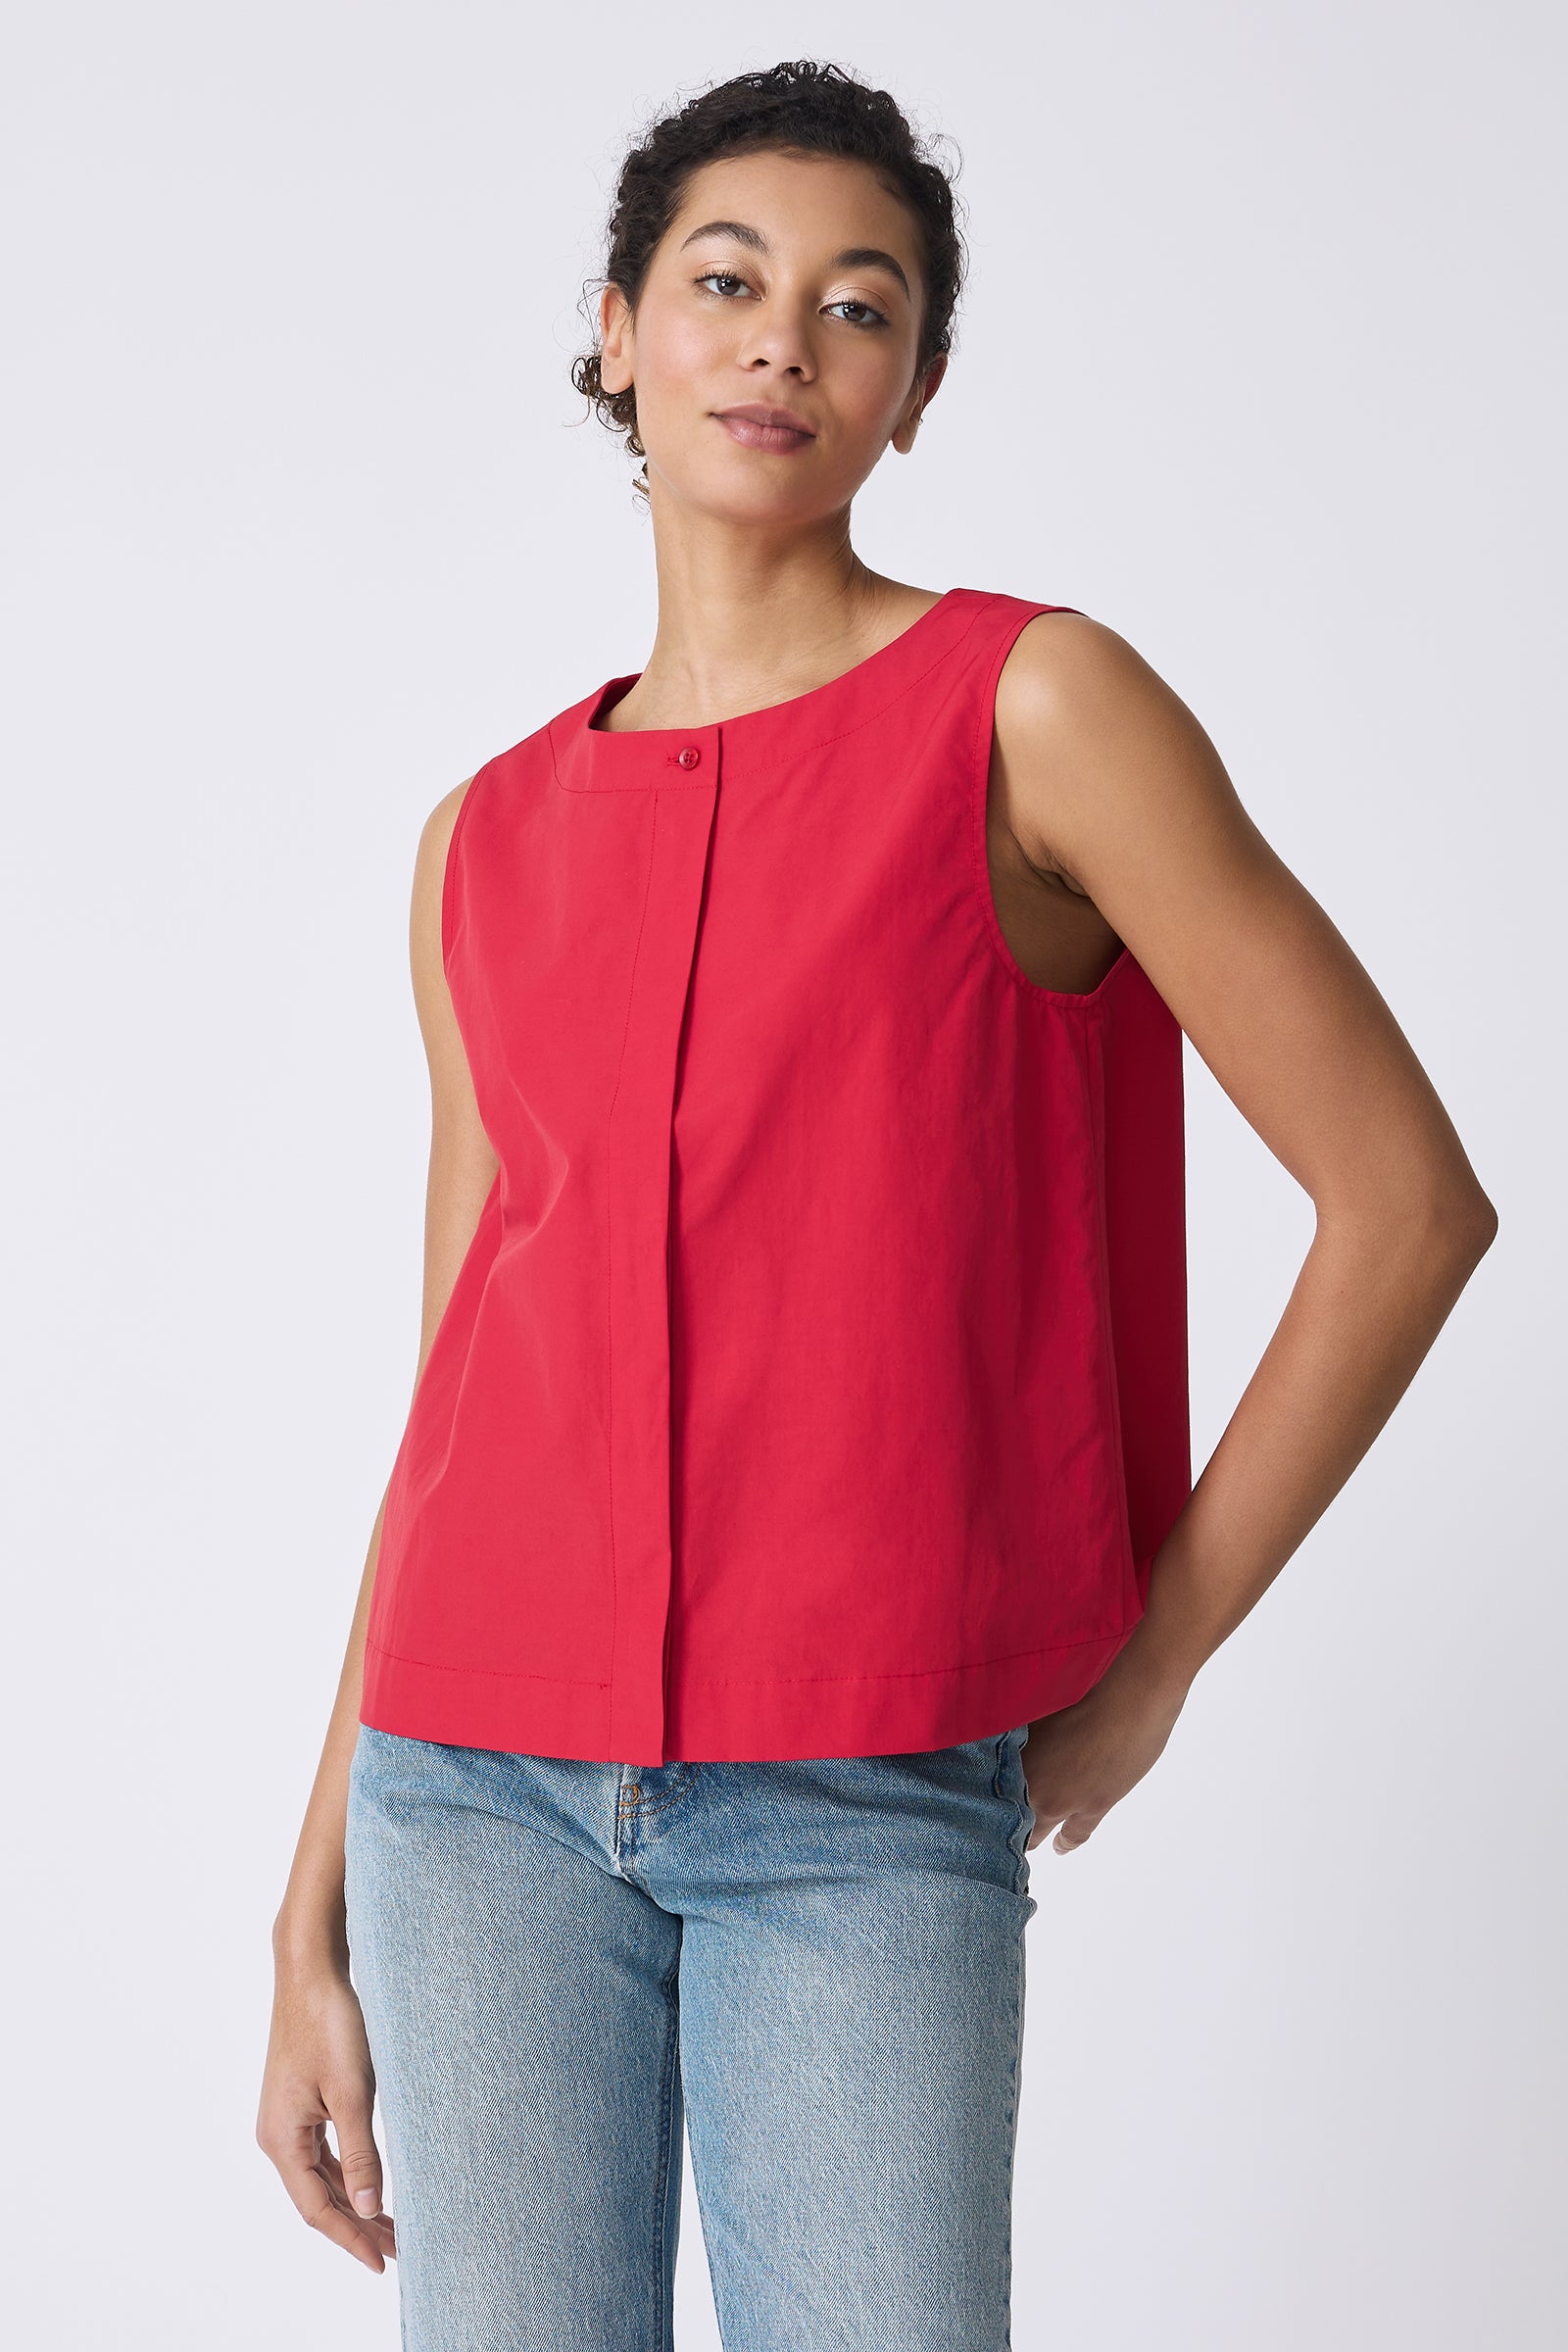 Kal Rieman Colette Shell Top in Red on model with arm behind back front view